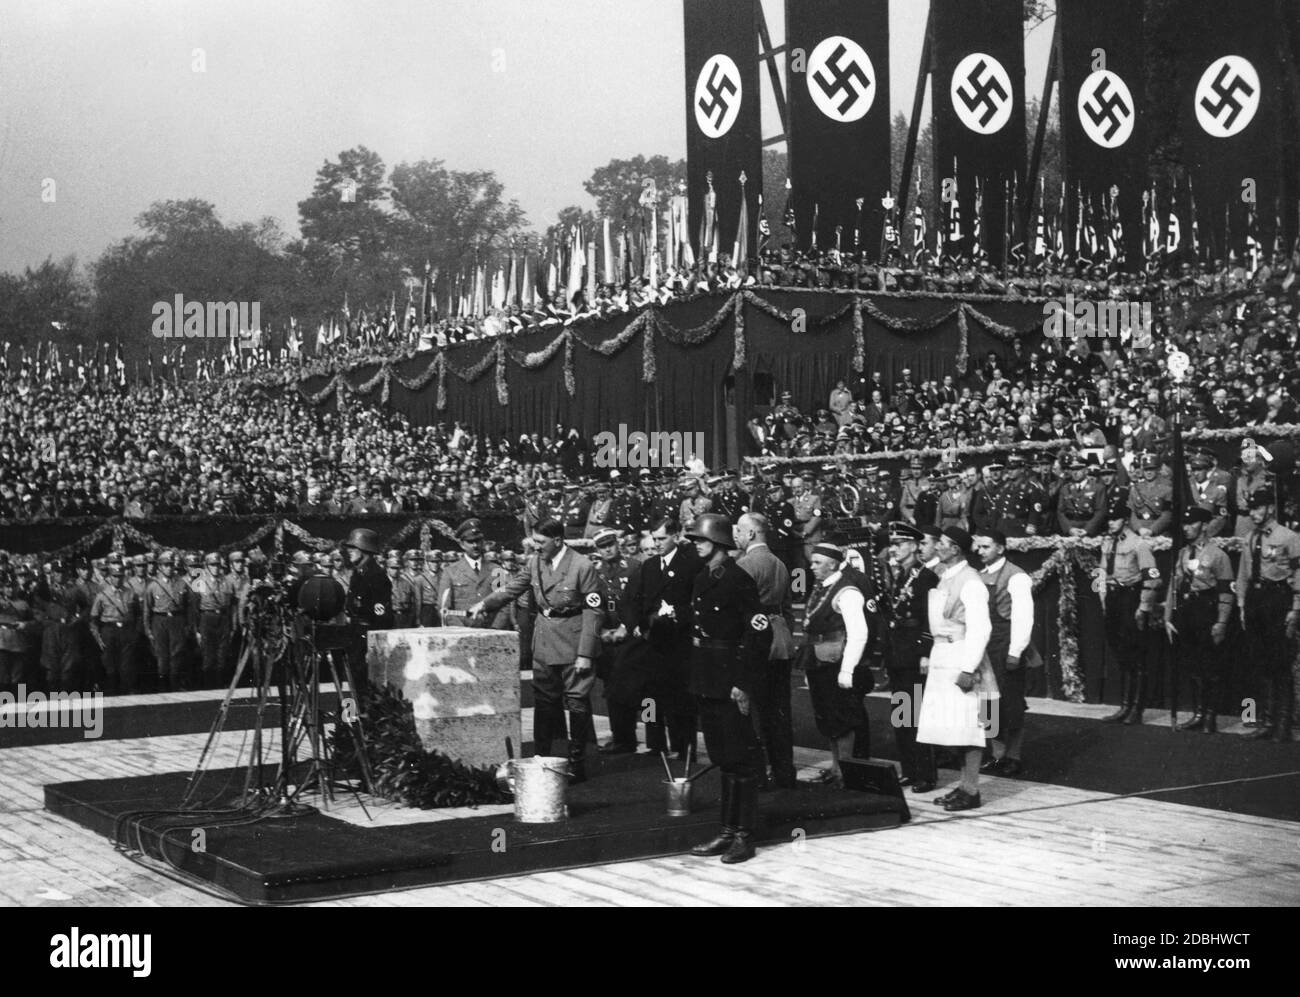 The Day of German Art with the laying of the foundation stone for the Haus der Kunst on 15.10.1933. At the lectern is Adolf Hitler. Behind Adolf Hitler stands August von Finck. Stock Photo